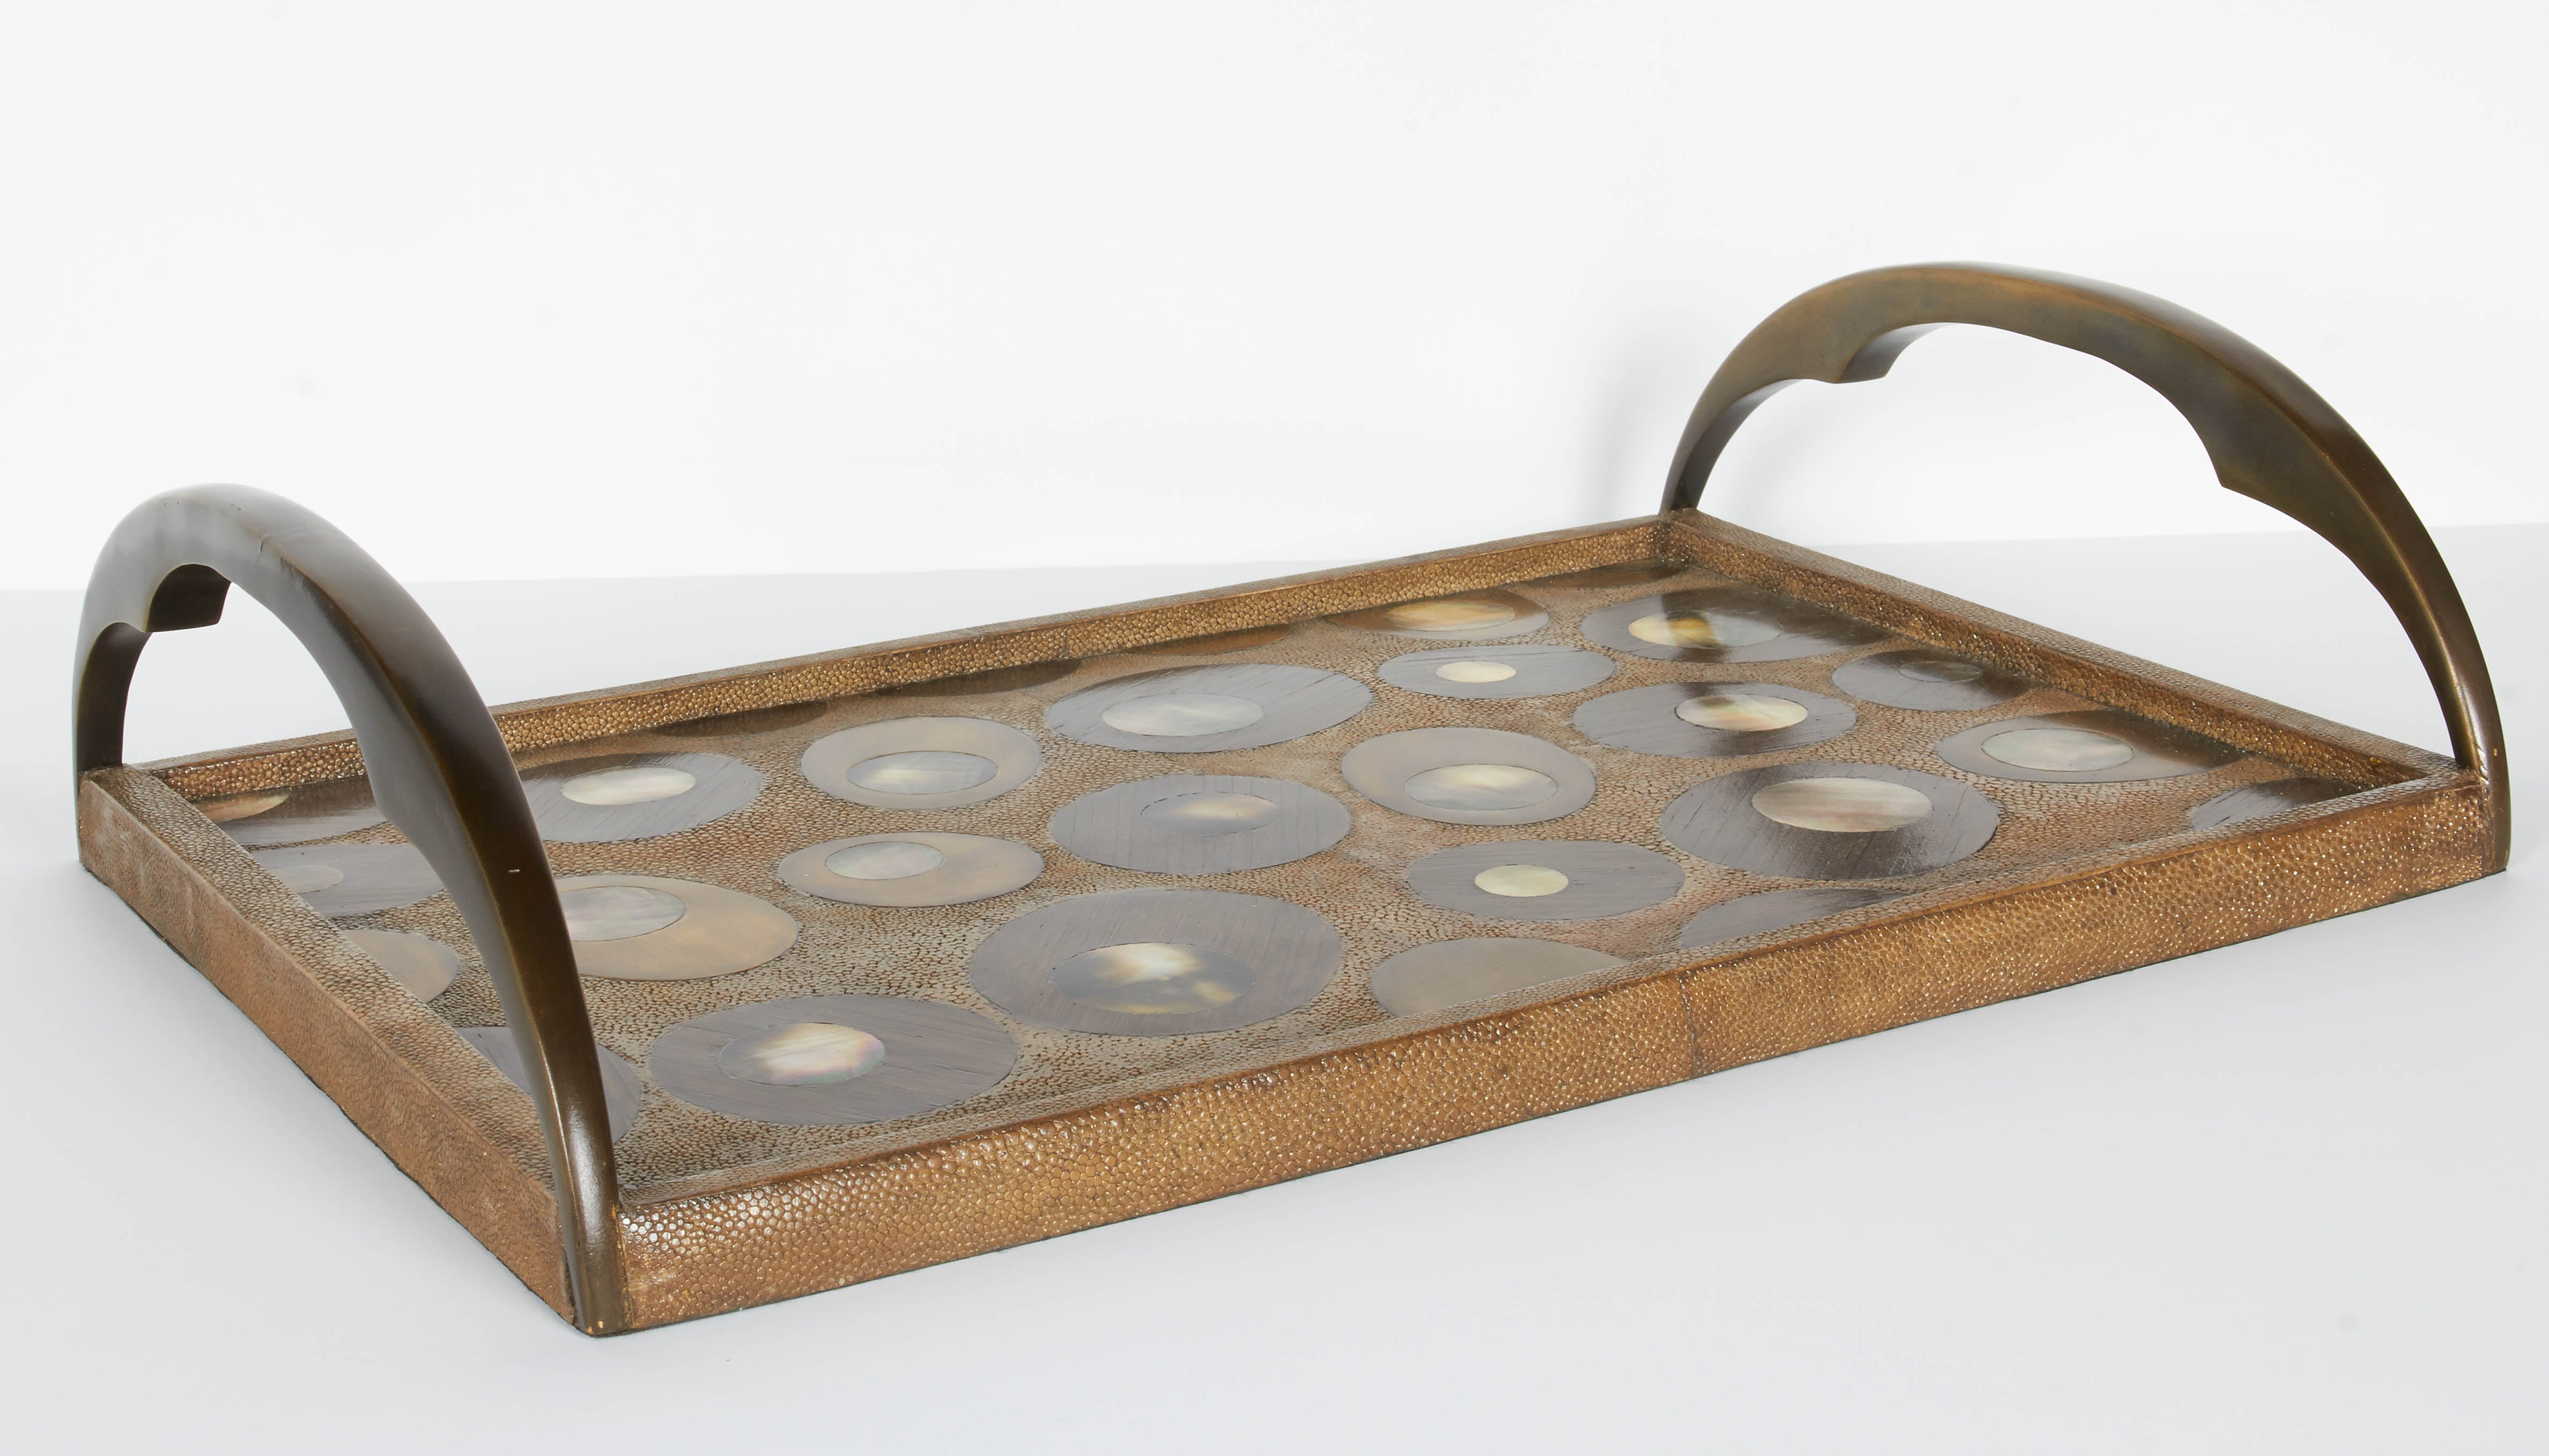 French Organic Modern Shagreen Tray with Mother of Pearl Inlays and Bronze Hardware